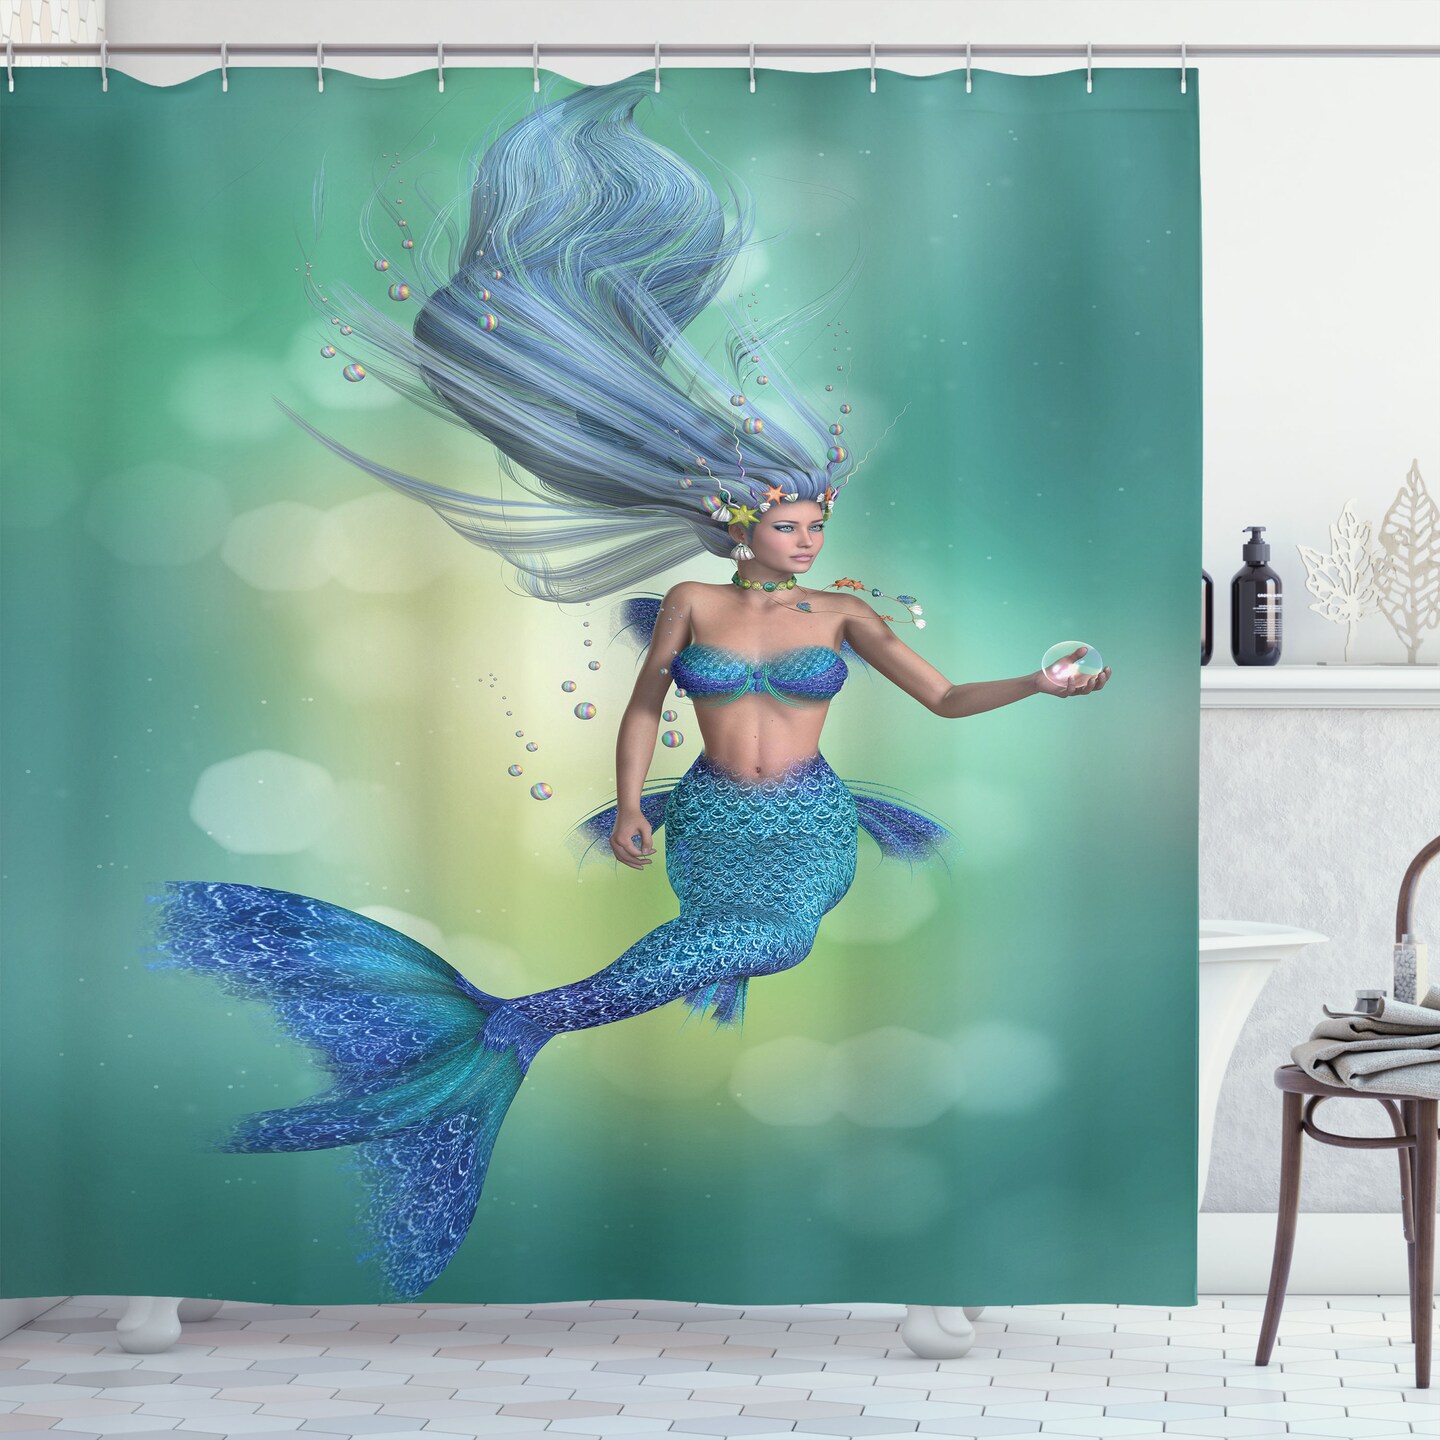 Ambesonne Underwater Shower Curtain, Mermaid Upper Body of a Woman and The  Tail of Fish for Swimming Marine Life, Cloth Fabric Bathroom Decor Set with  Hooks, 69 W x 84 L, Teal